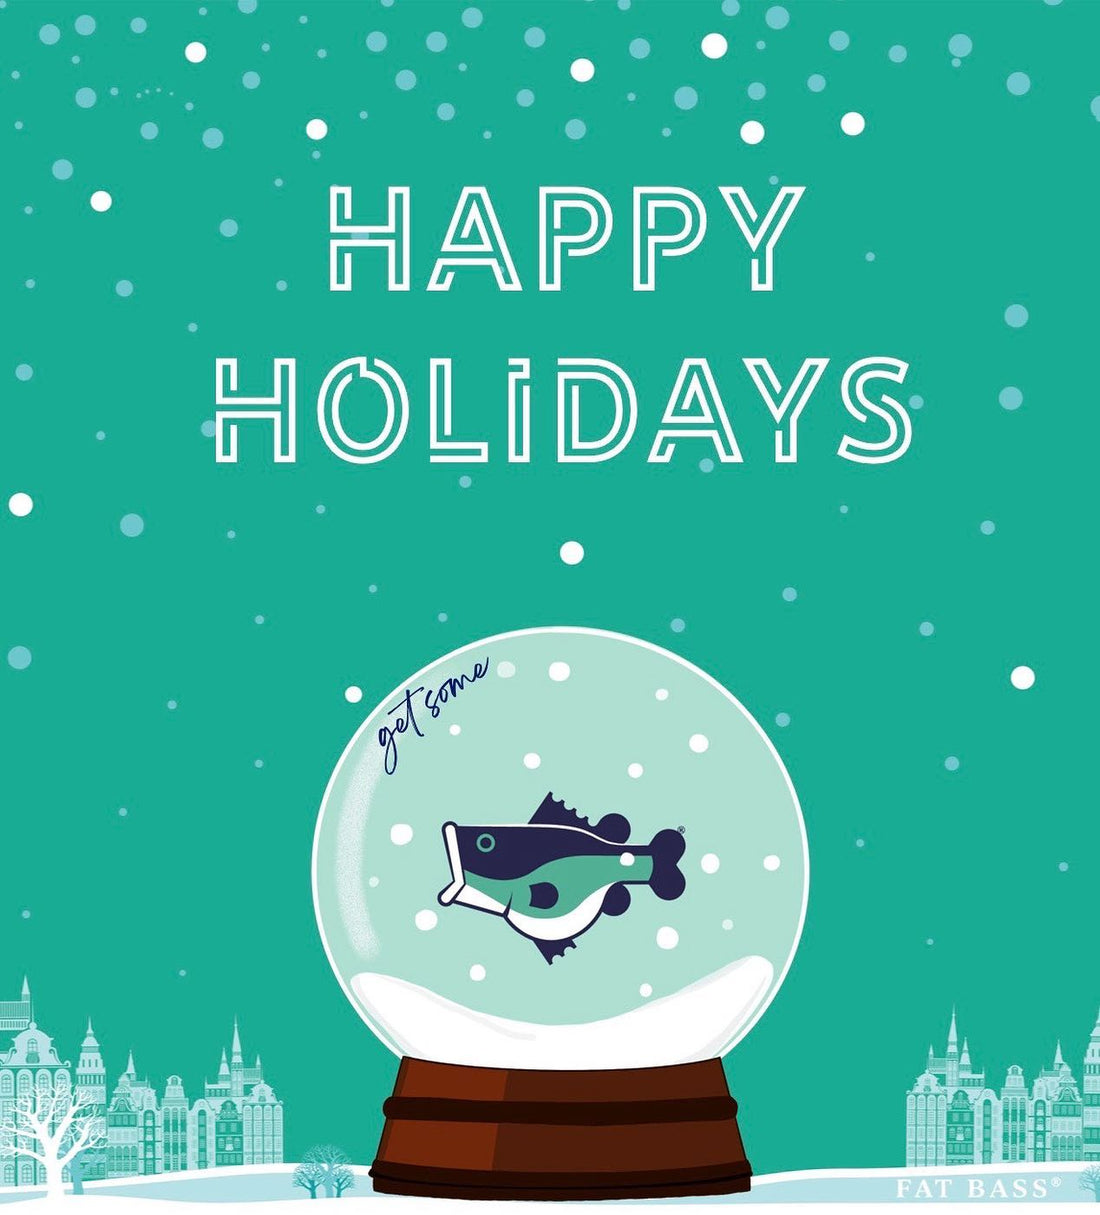 Happy Holidays from our families to yours!